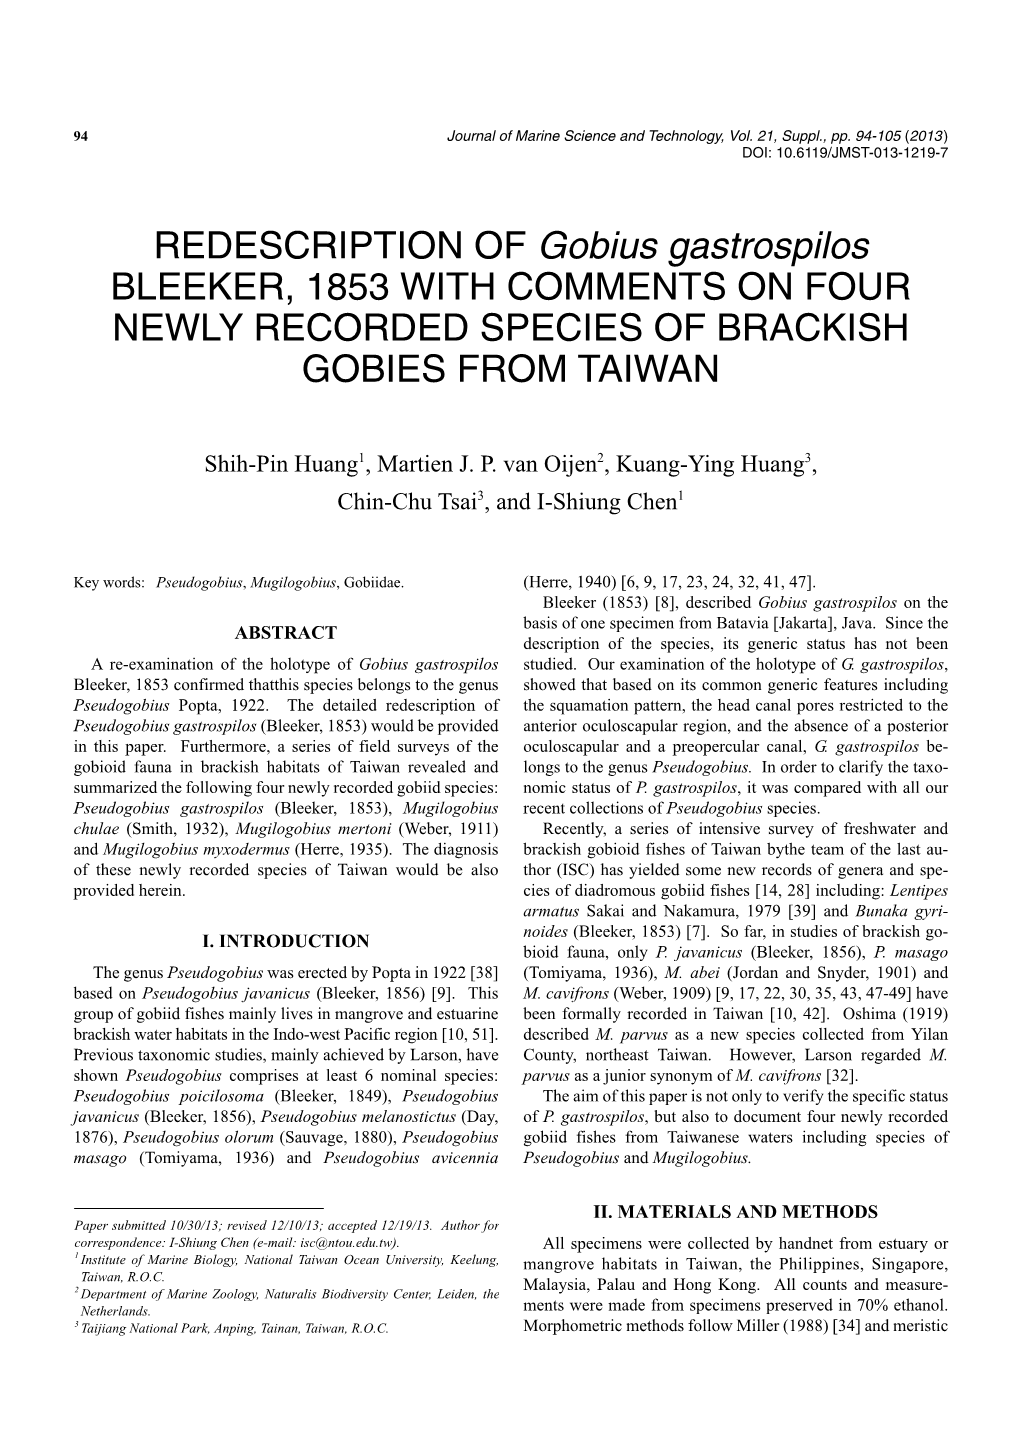 REDESCRIPTION of Gobius Gastrospilos BLEEKER, 1853 with COMMENTS on FOUR NEWLY RECORDED SPECIES of BRACKISH GOBIES from TAIWAN